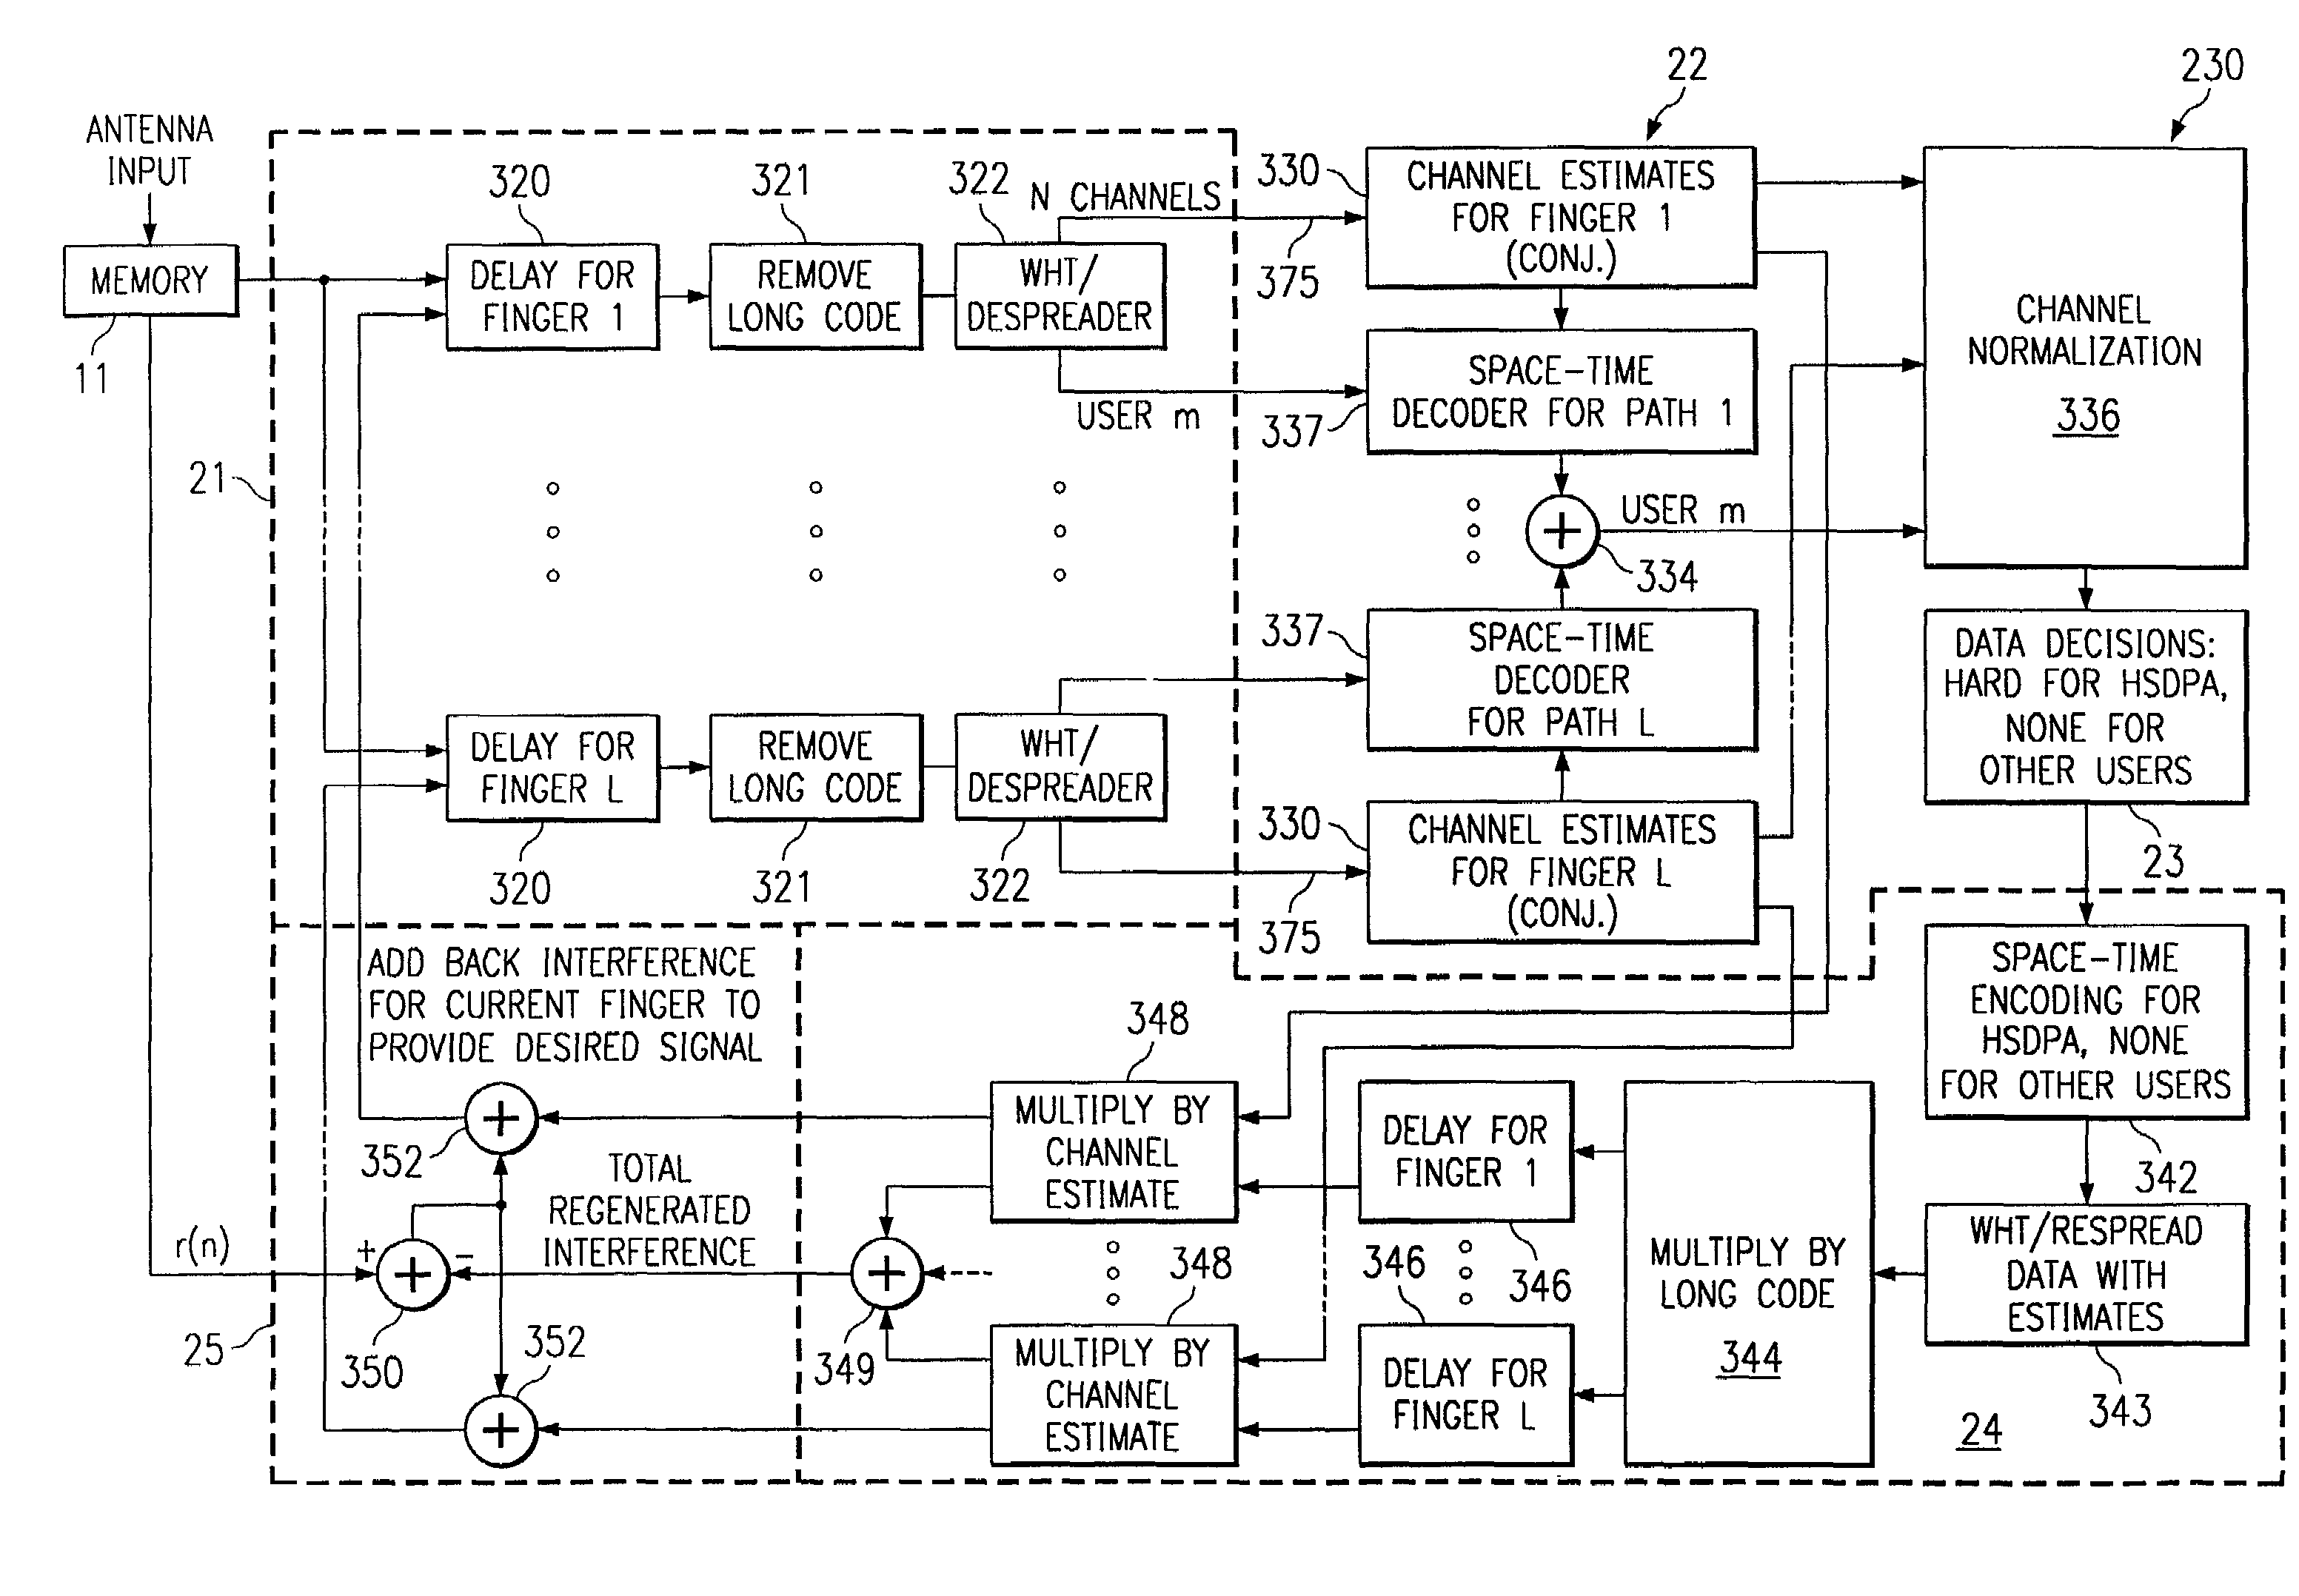 Multi-path interference cancellation for transmit diversity